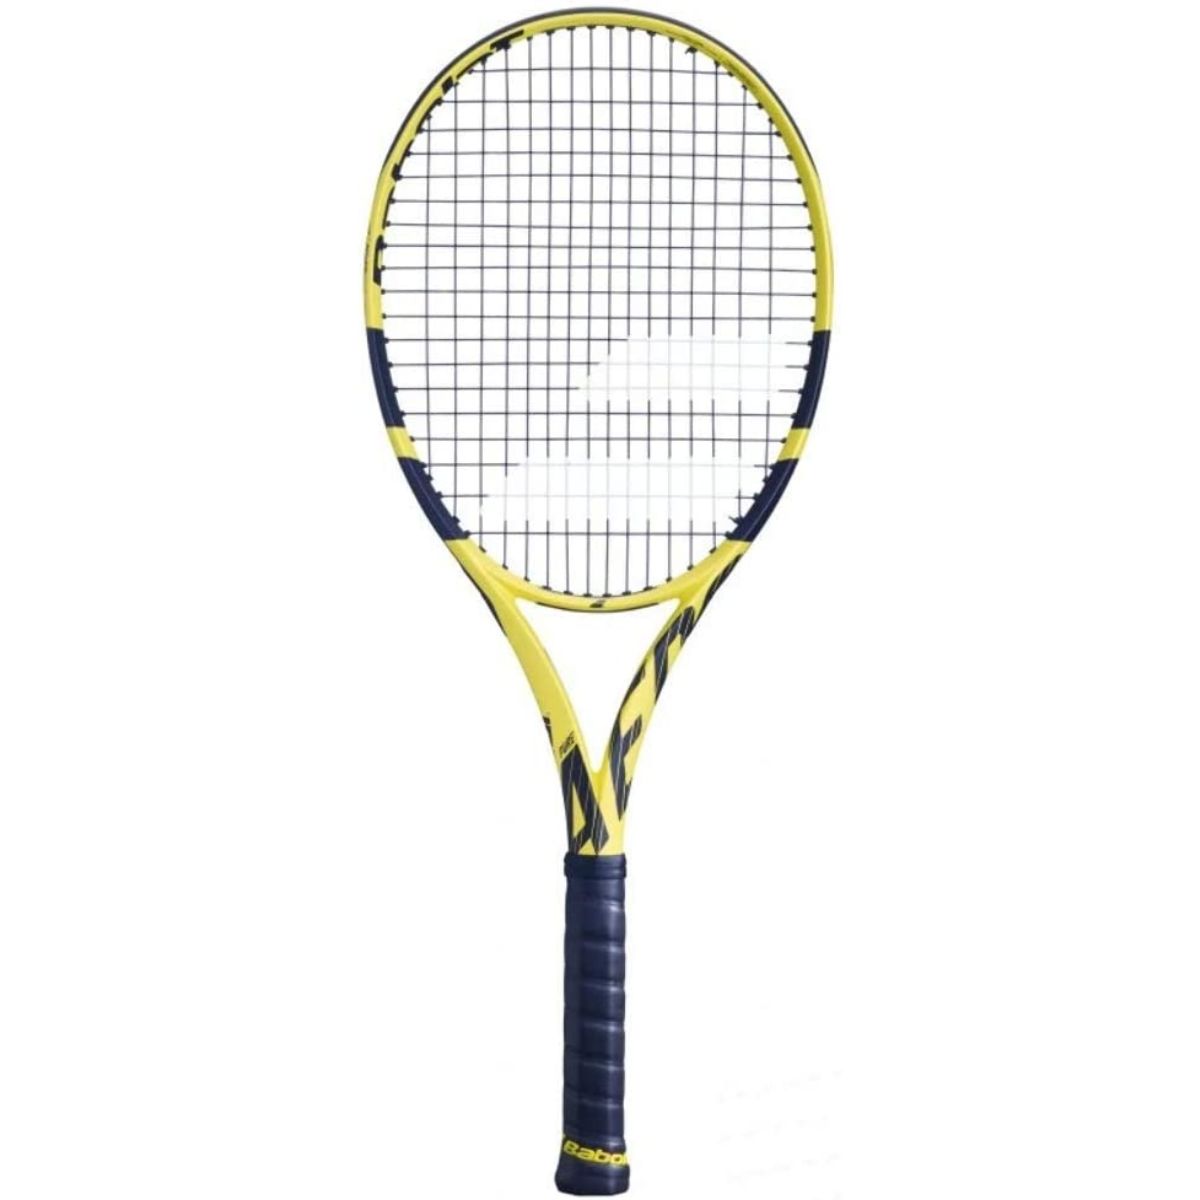 The Best Tennis Rackets for Doubles Options: Babolat Pure Aero